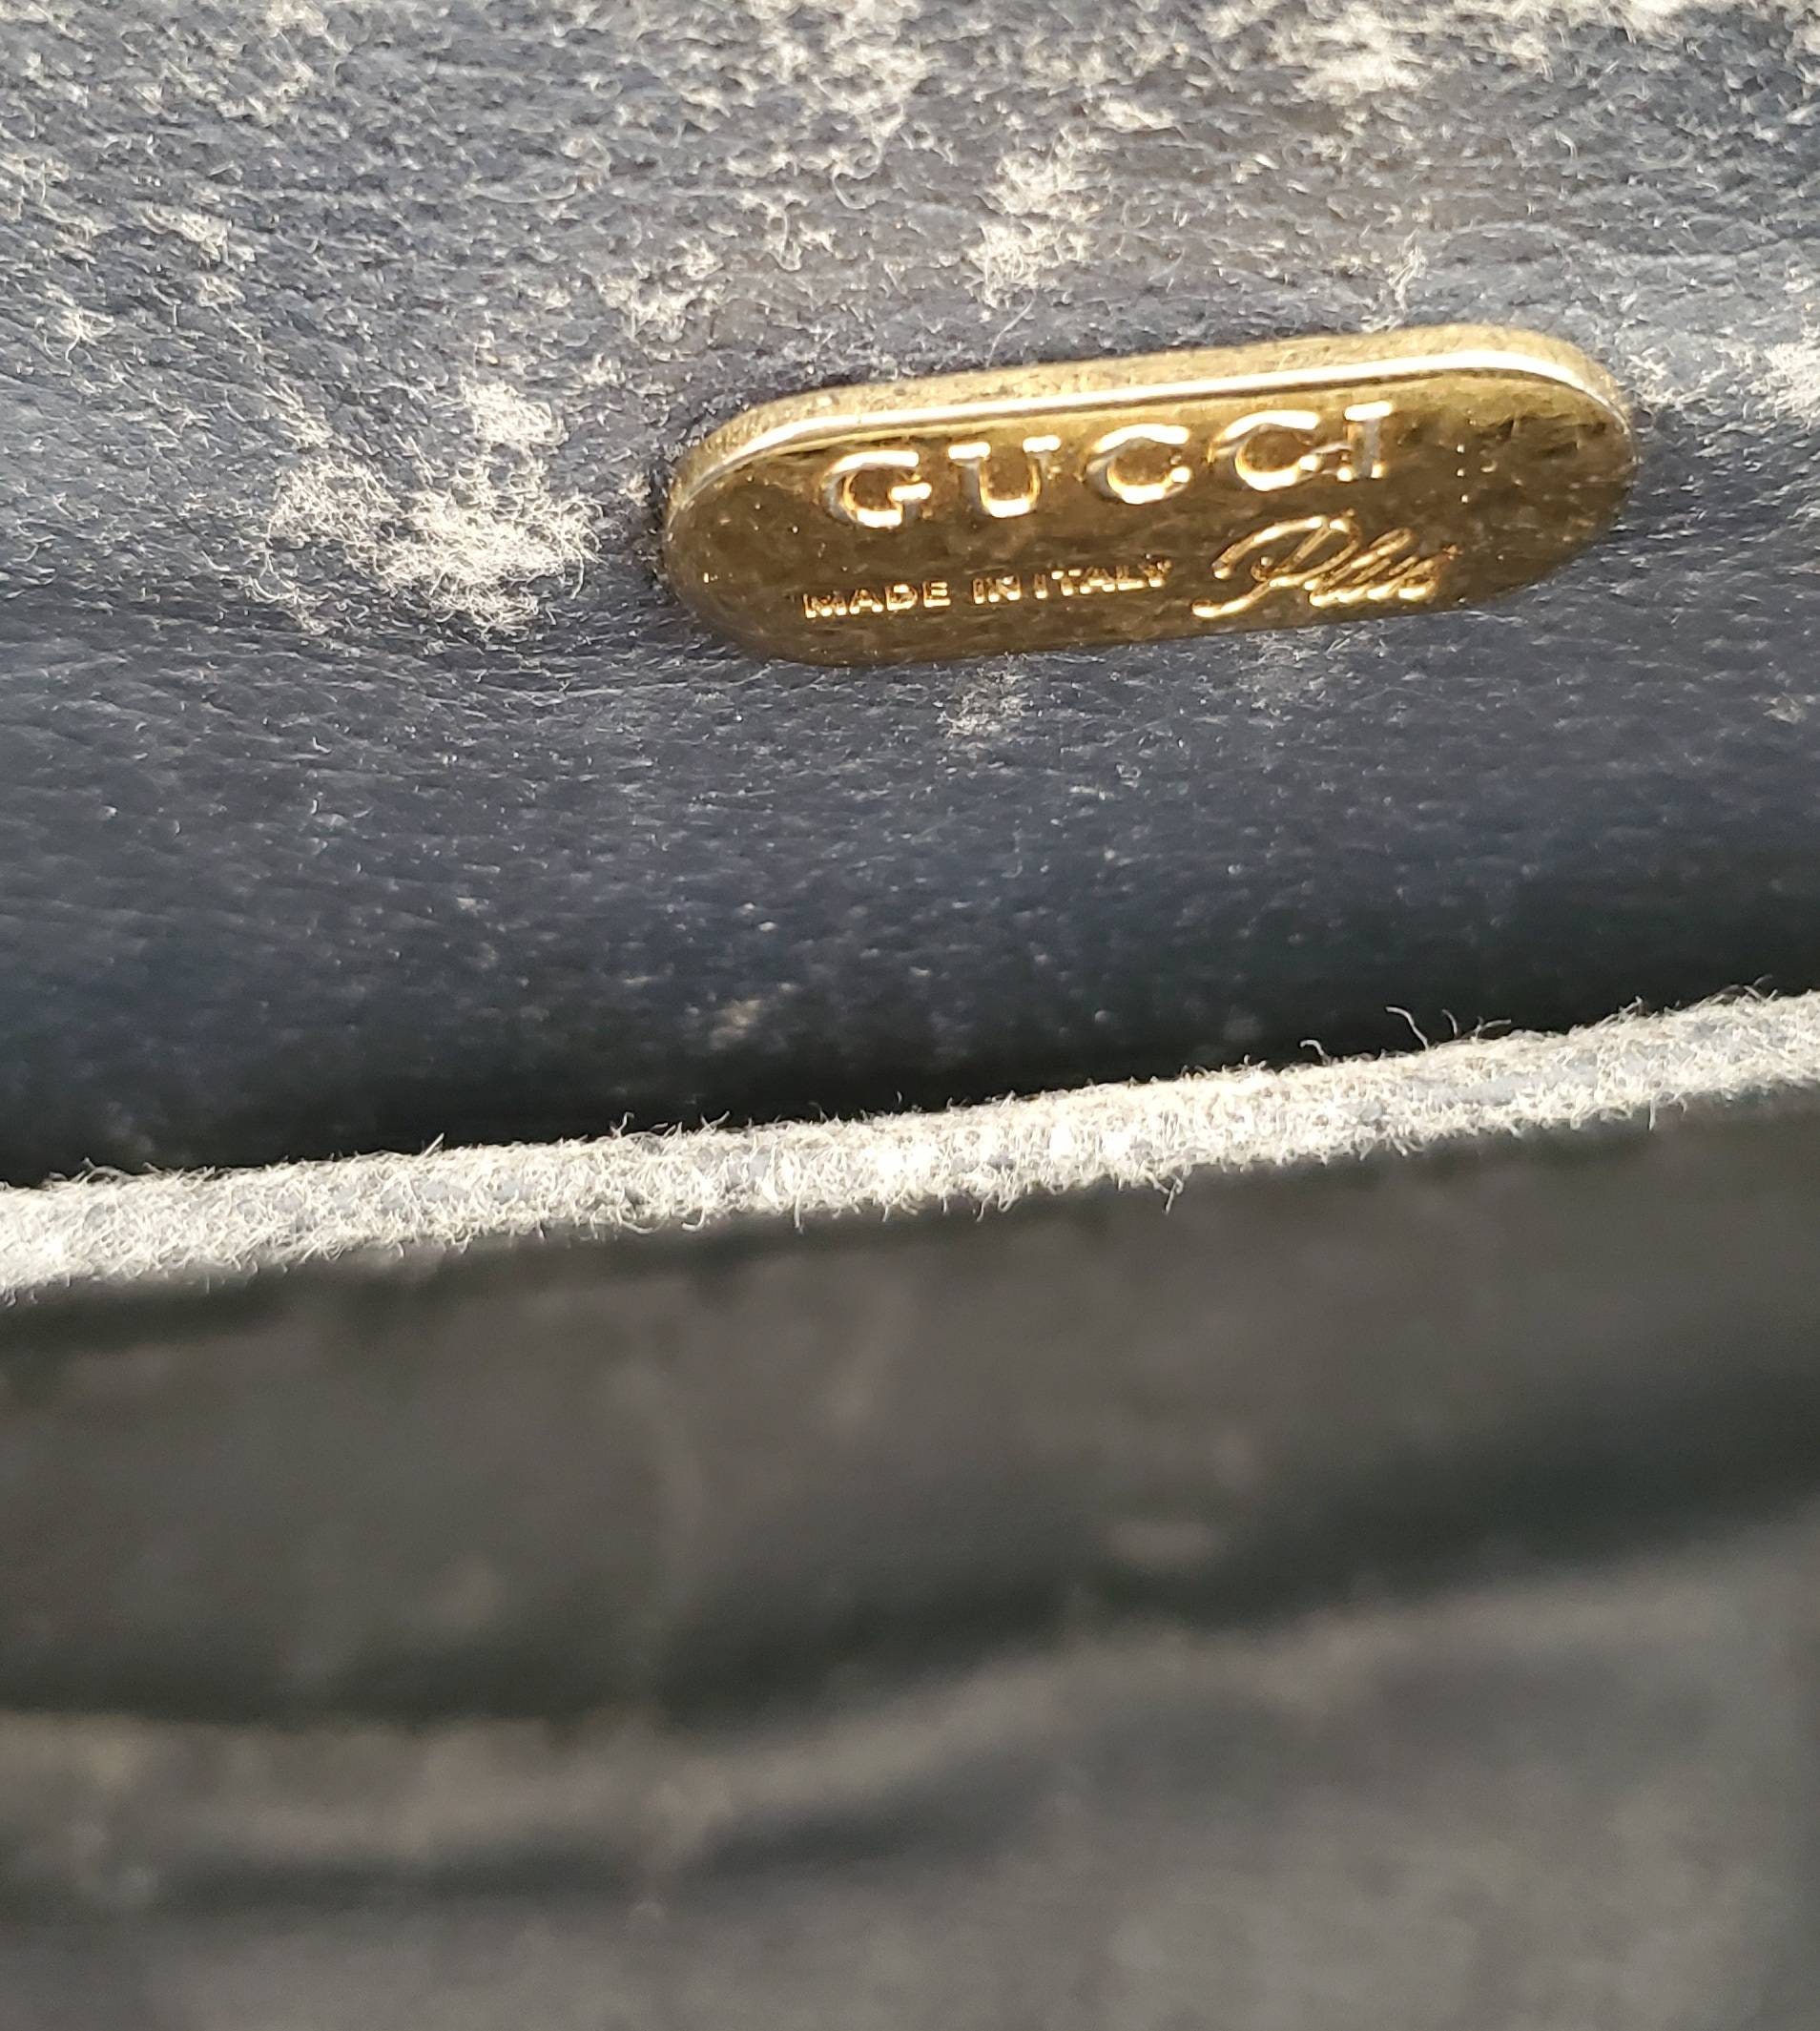 Gucci Toiletry Case Monogram GG Plus Navy Blue in Canvas with Silver-tone -  US